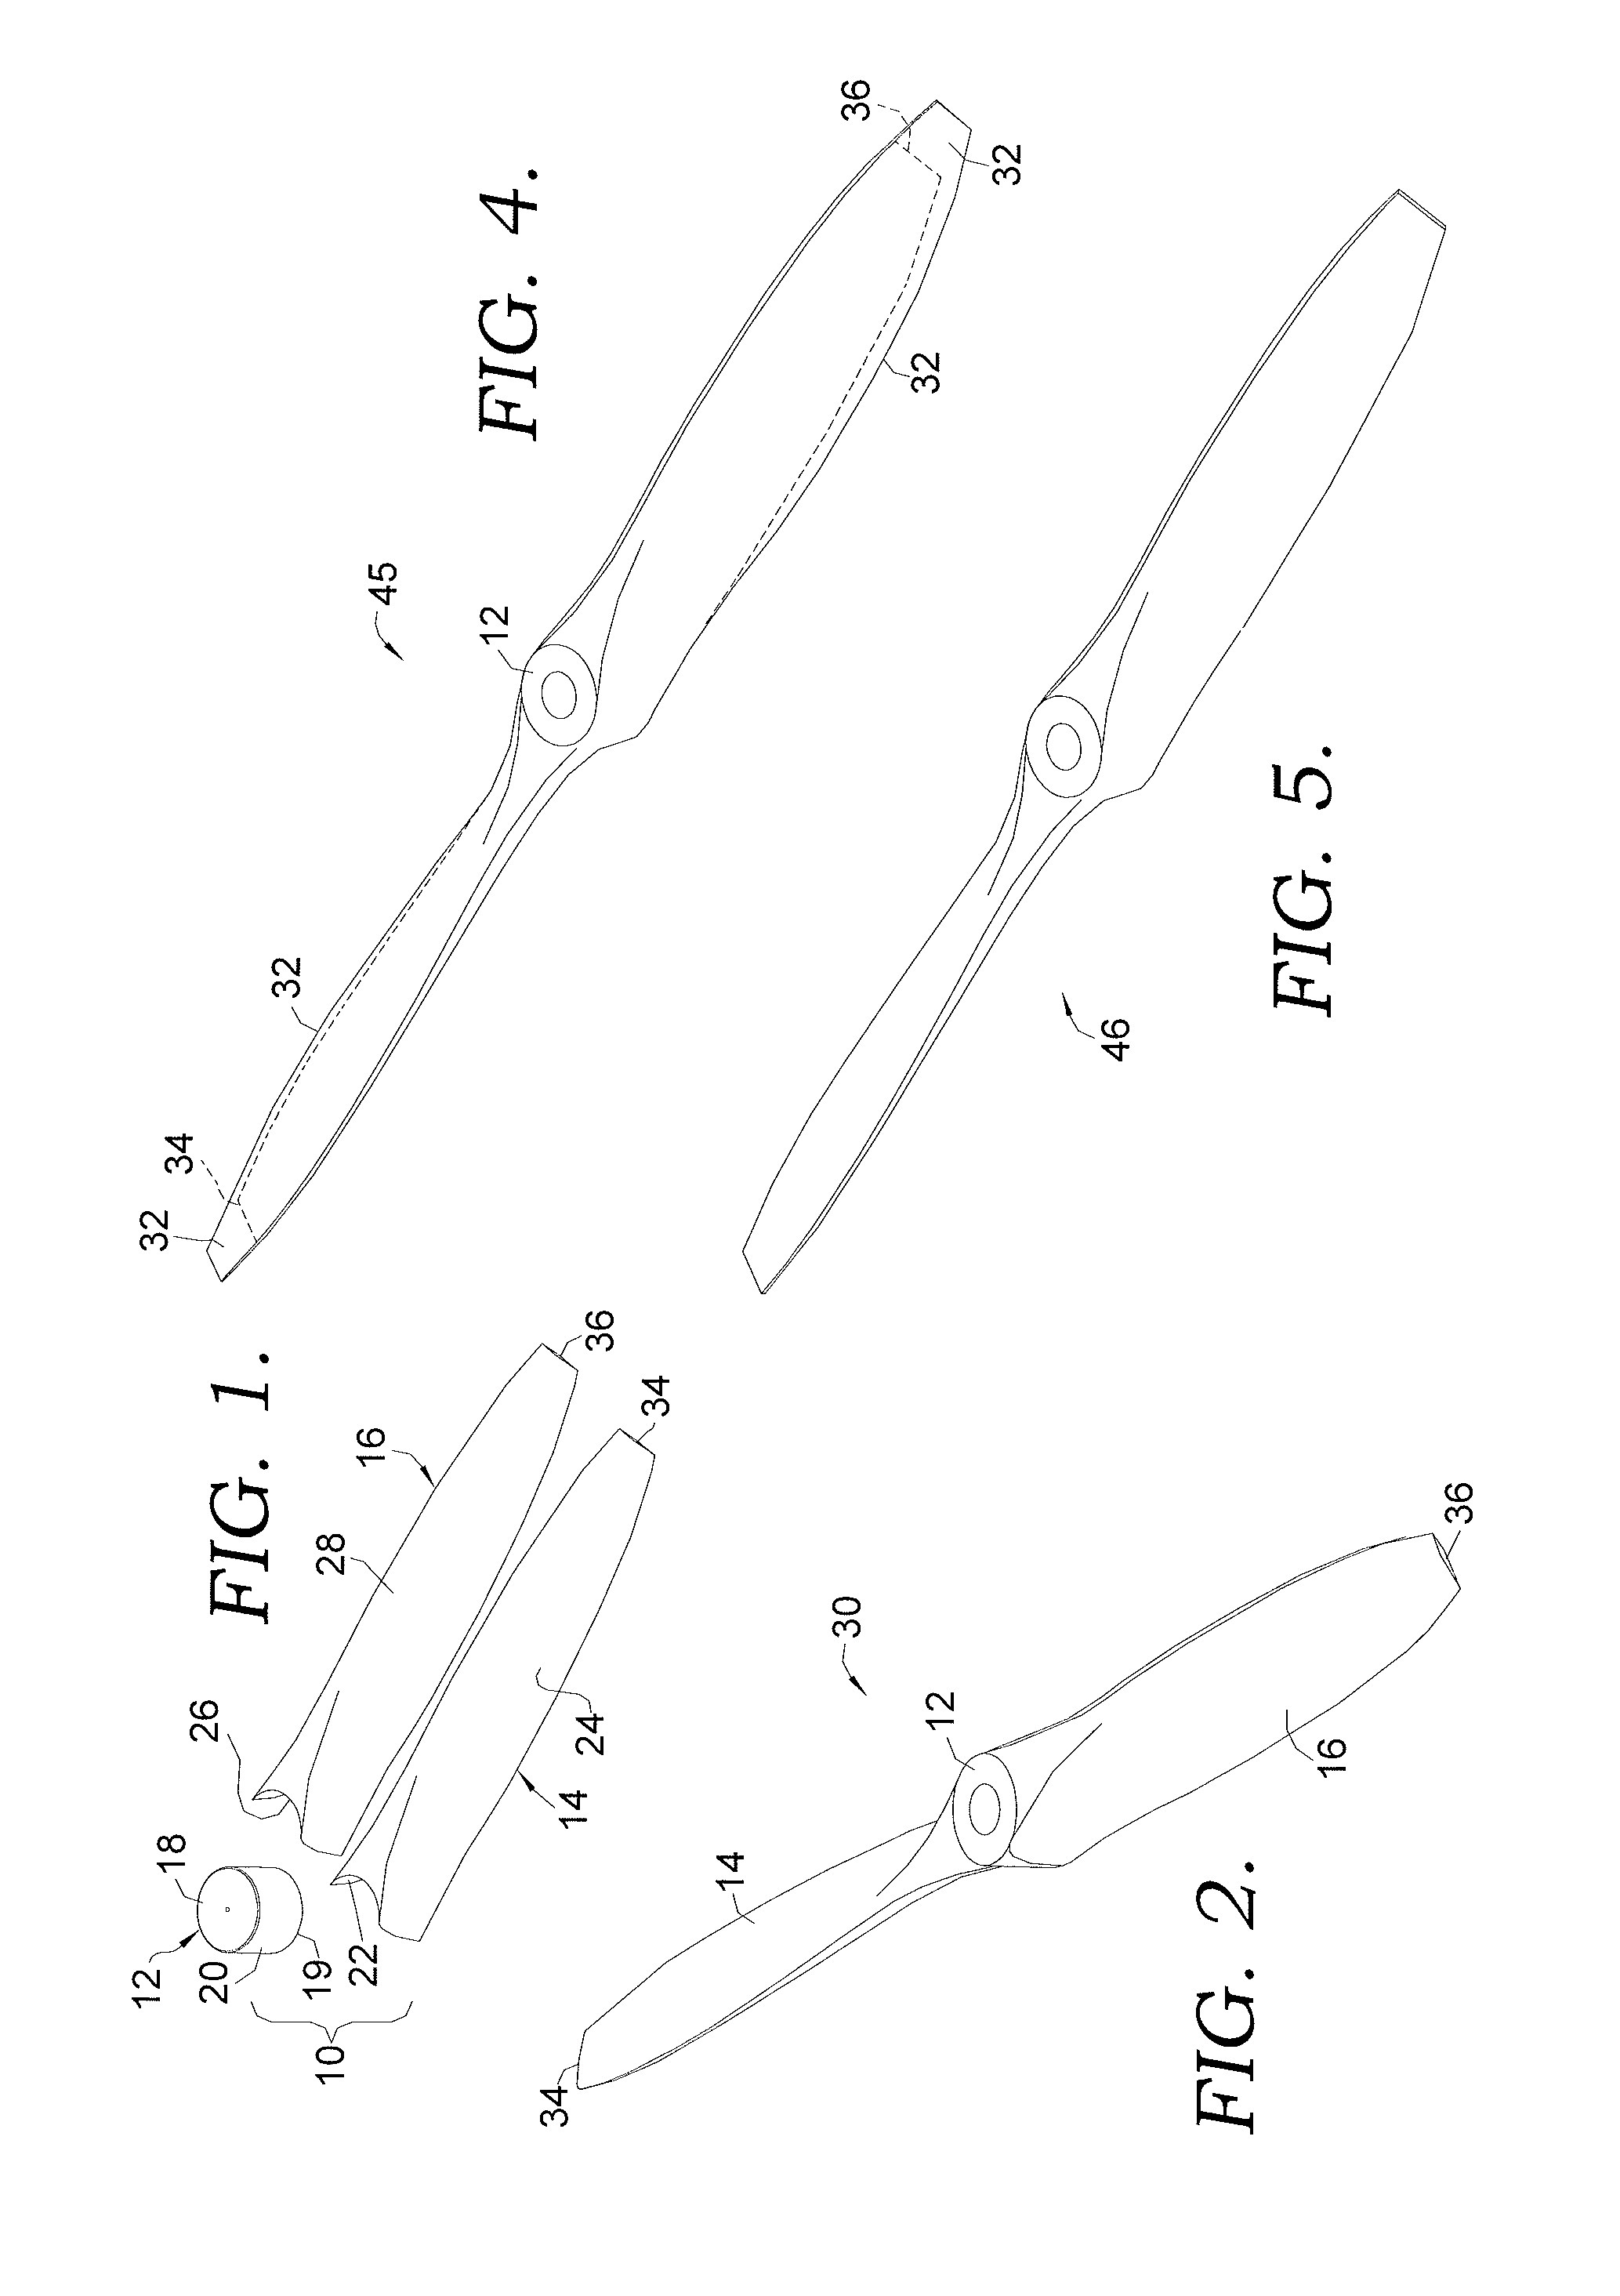 Single-Piece Propeller And Method Of Making